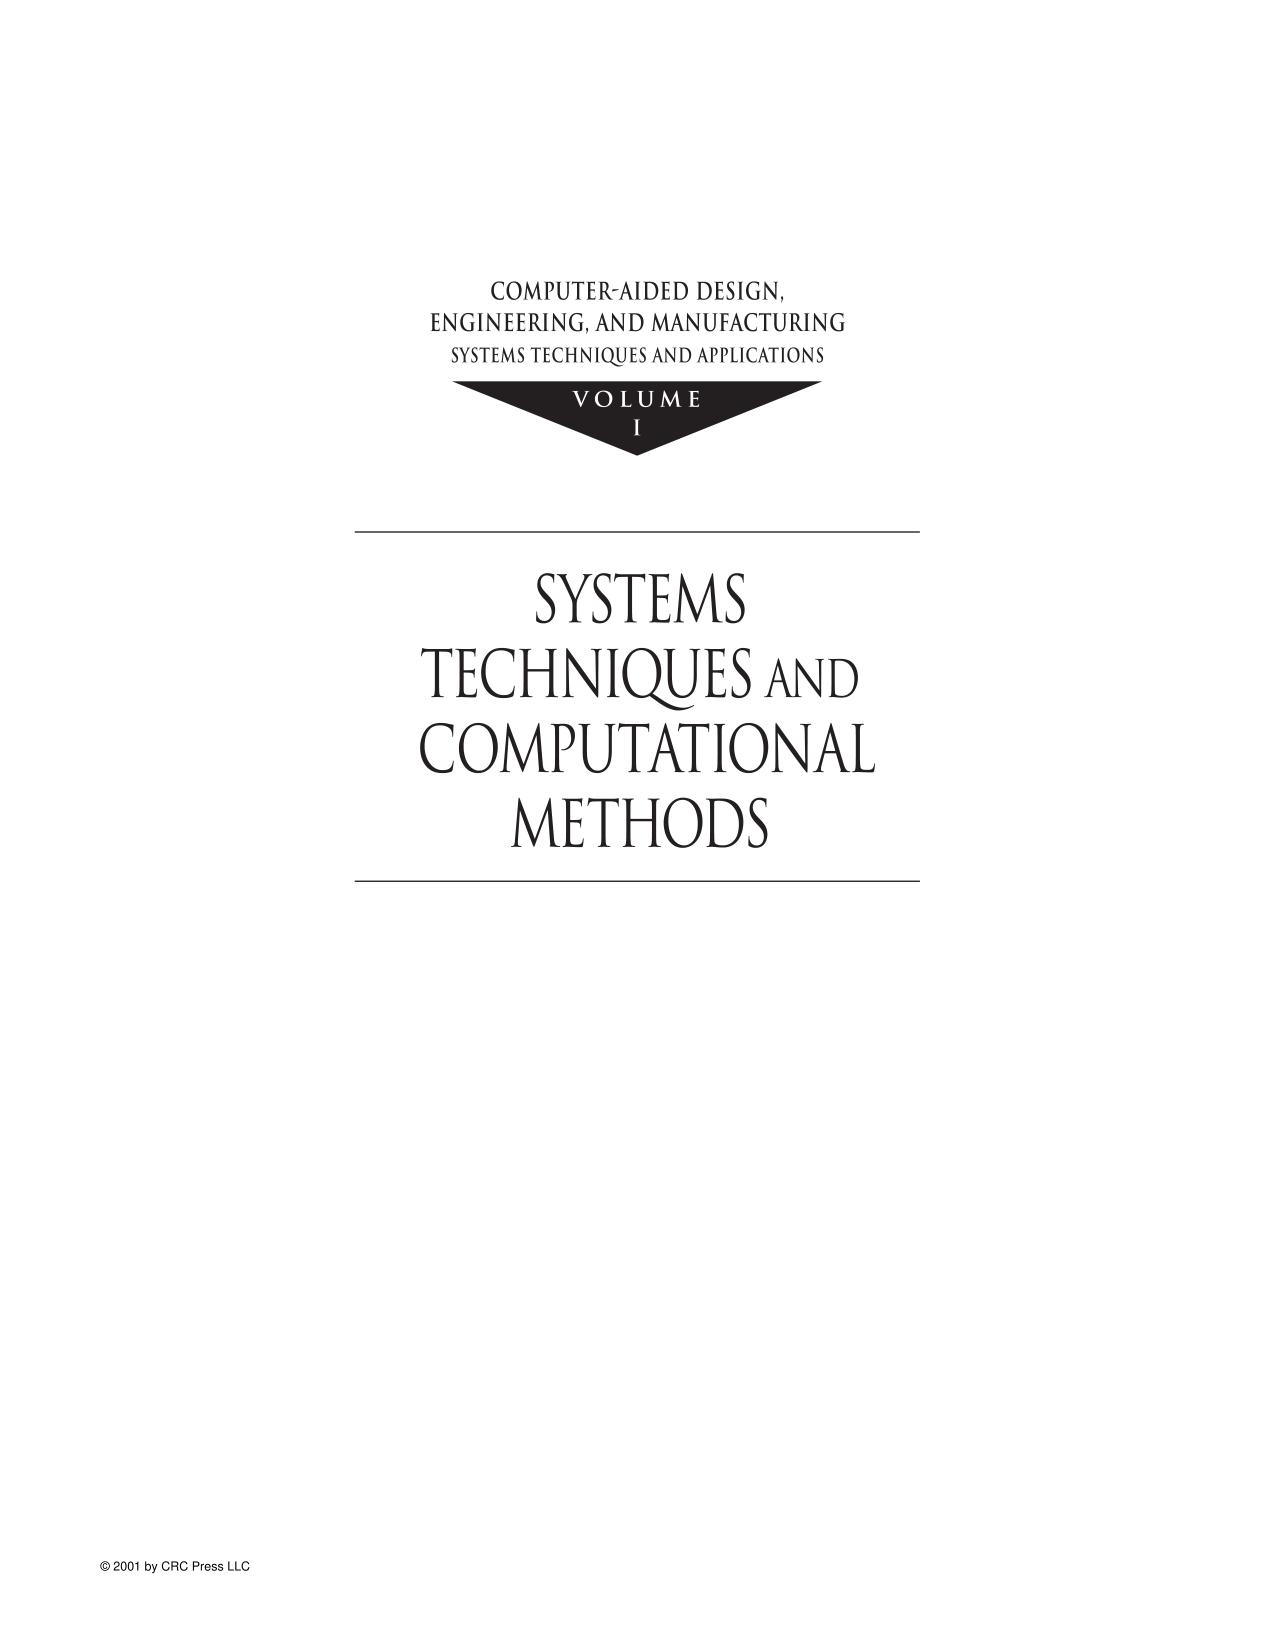 Computer-aided design, engineering, and manufacturing systems techniques and applications. Volume I, Systems techniques and computational methods